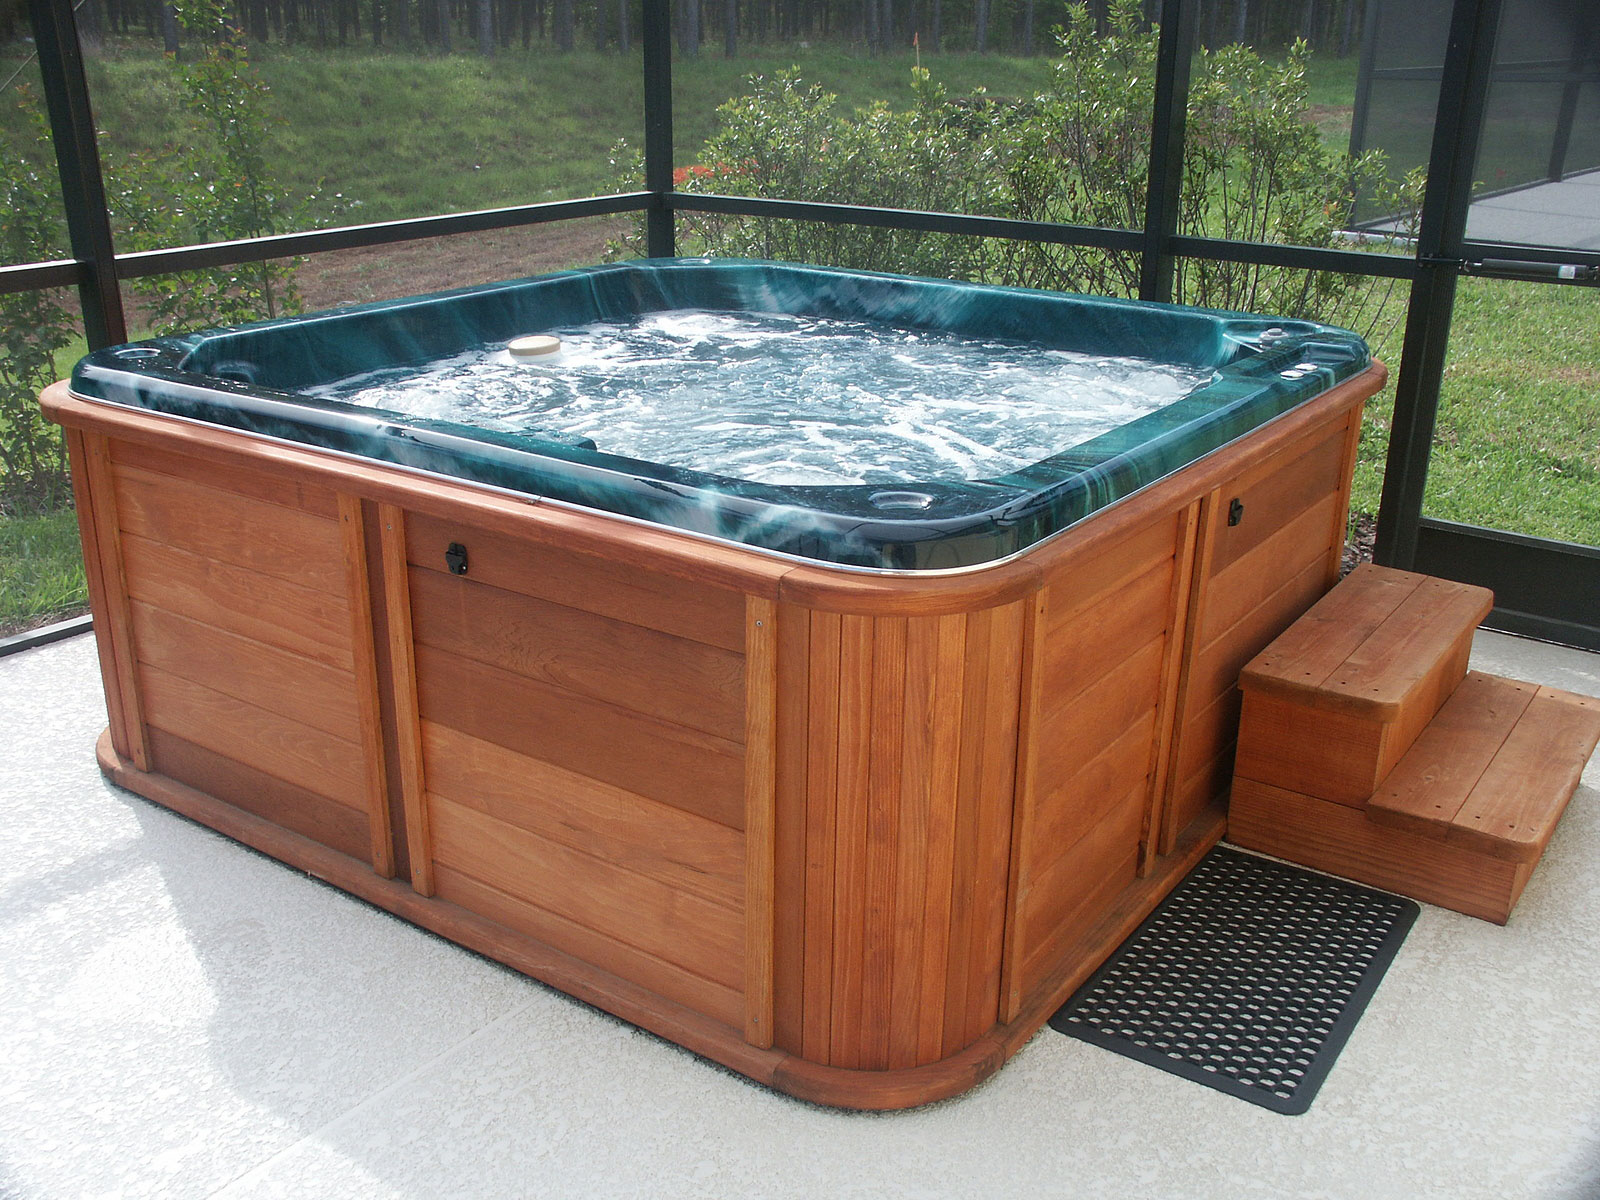 Rules On Displaying Hot Tubs In Shops And Public Places